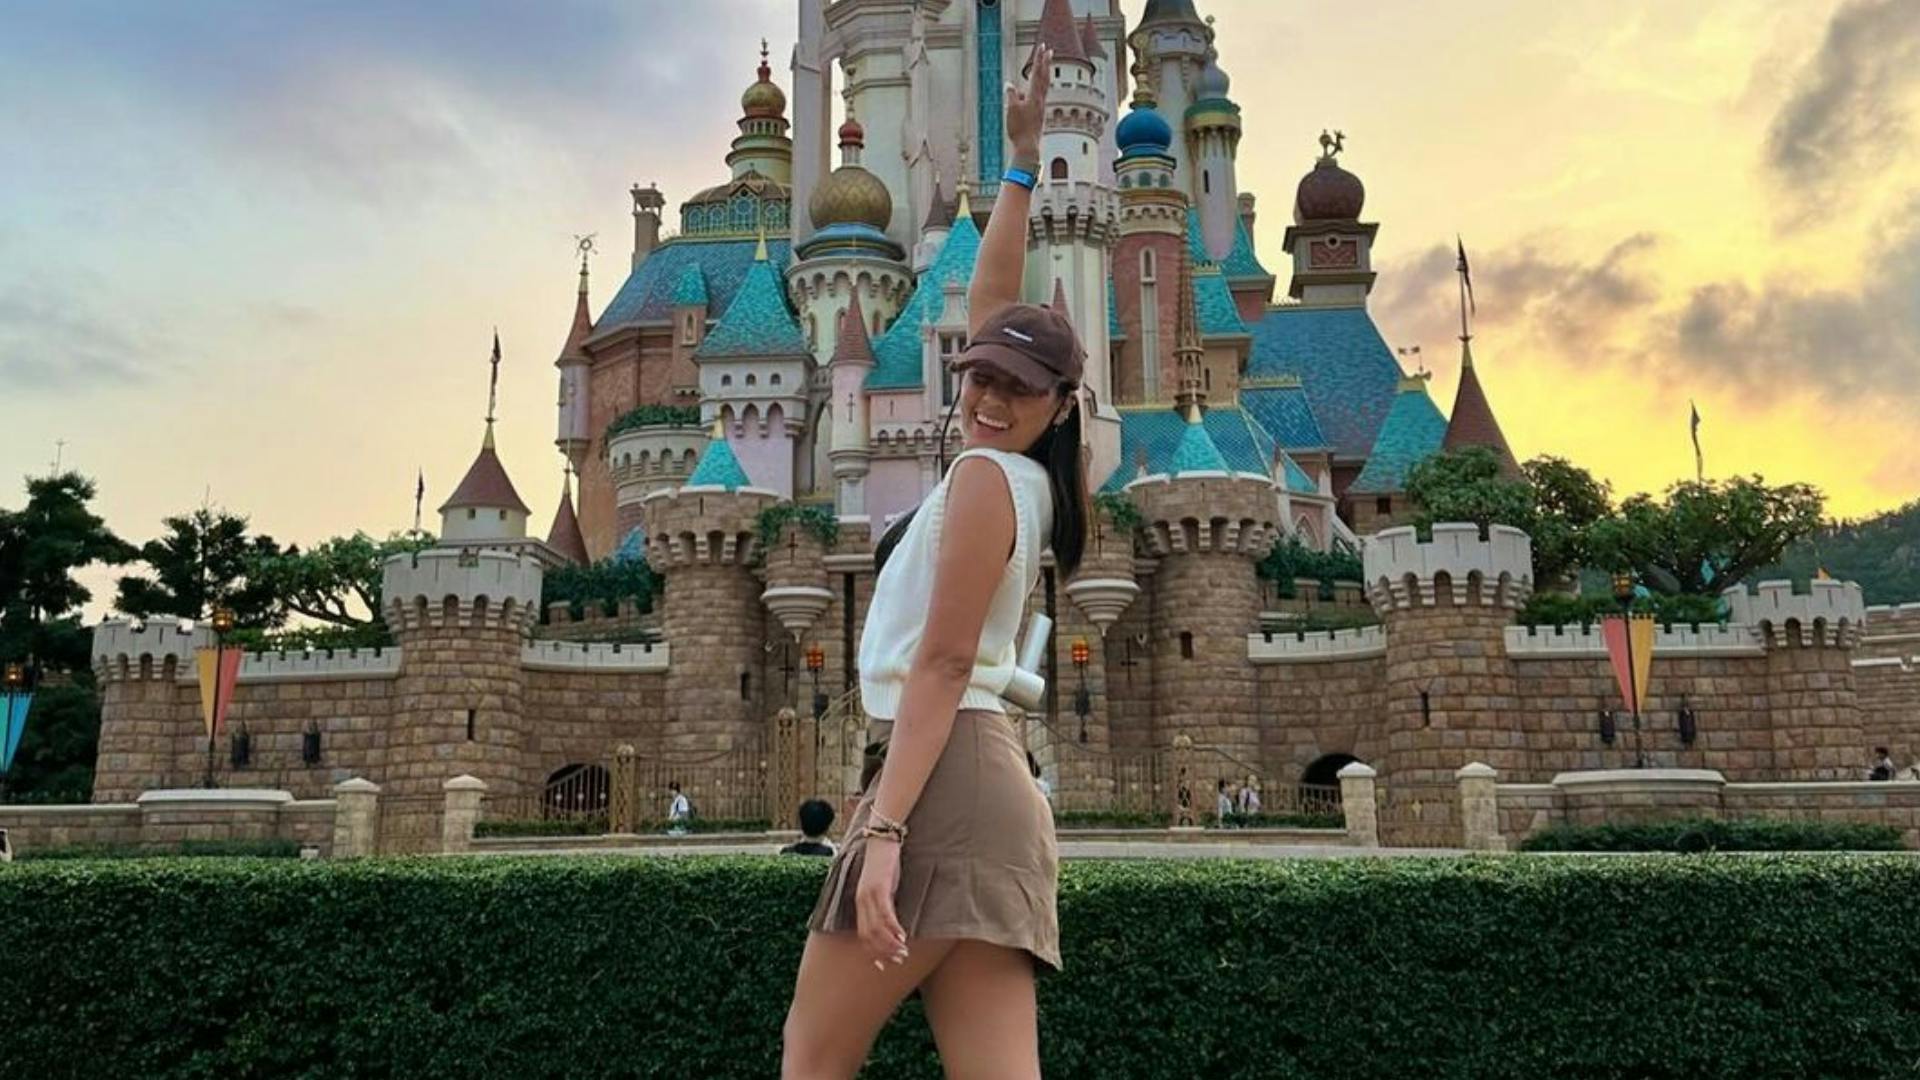 Fairy Tale begins: Akari Chargers’ Ced Domingo starts fulfilling her dream of visiting Disneylands
